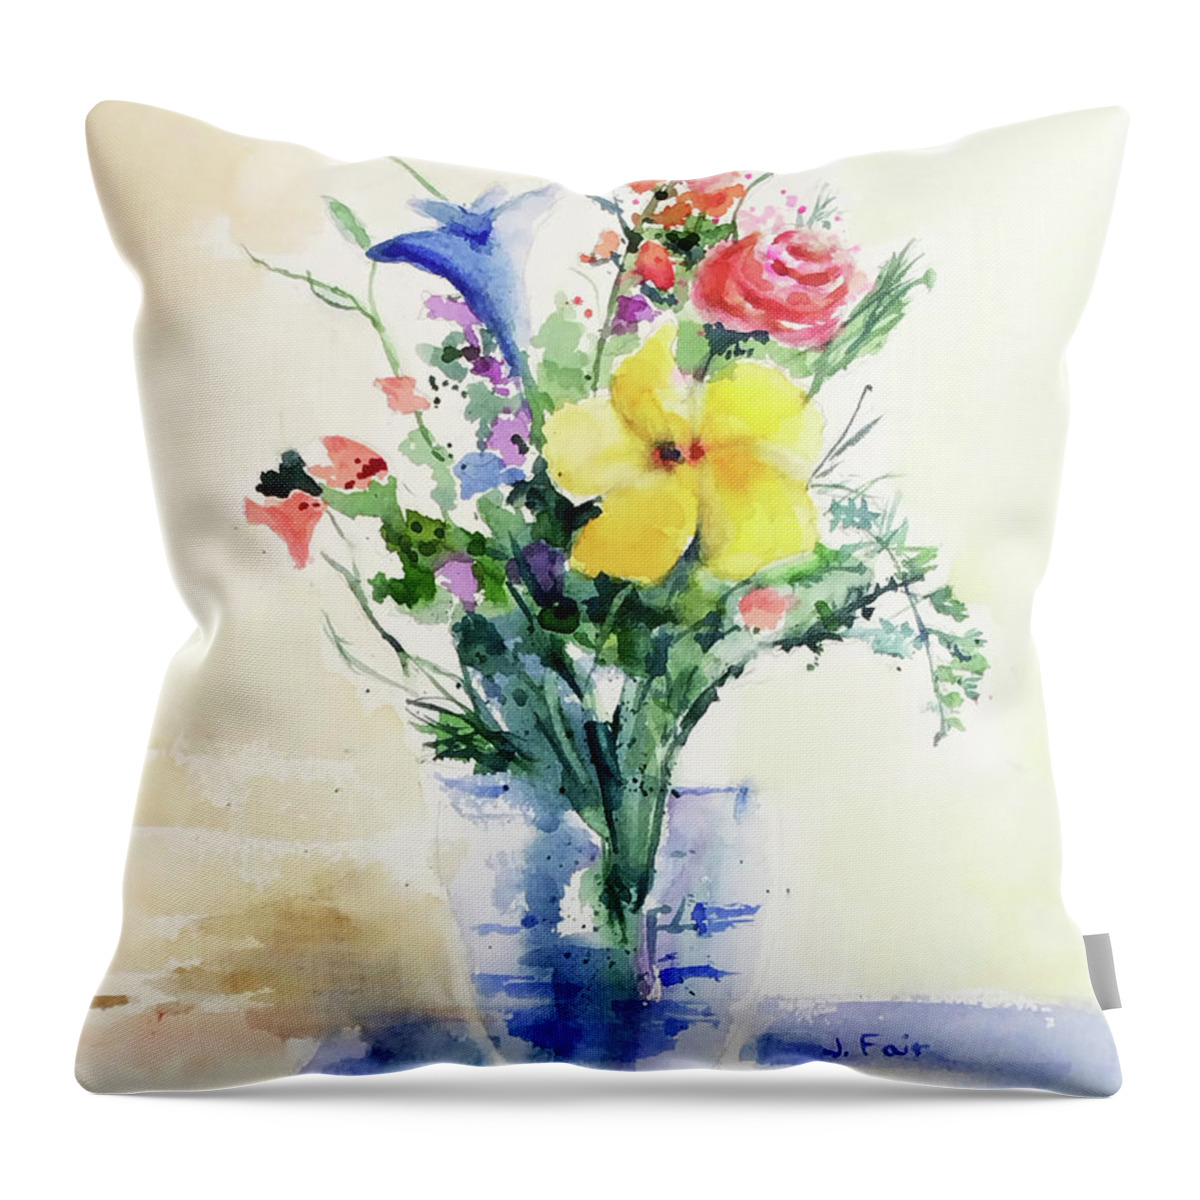 Flower Throw Pillow featuring the painting Flower Bouquet by Jerry Fair